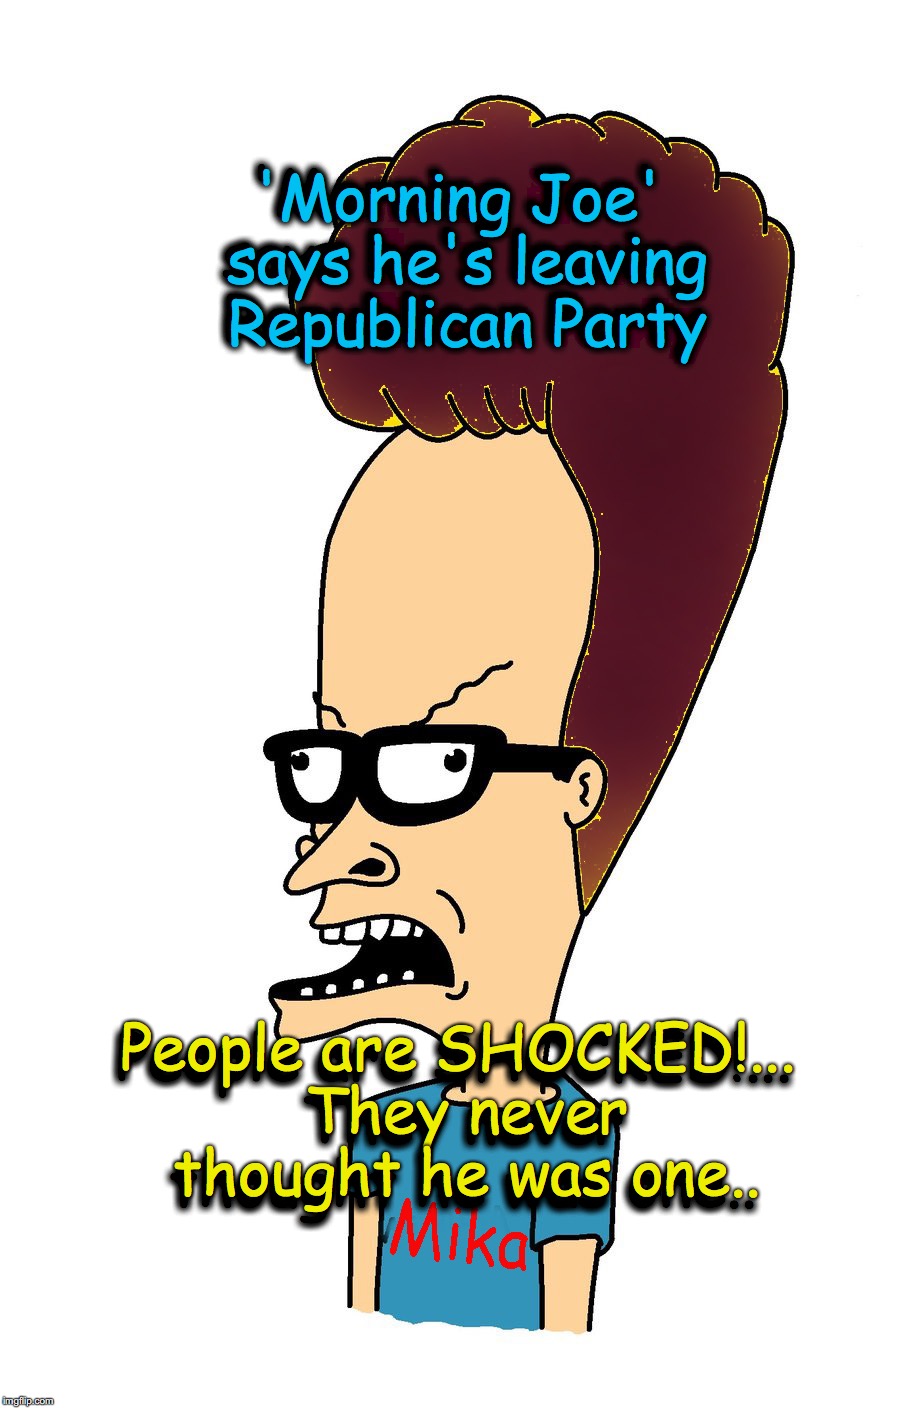 'Morning Joe' says he's leaving Republican Party; 'Morning Joe' says he's leaving Republican Party; People are SHOCKED!... They never thought he was one.. People are SHOCKED!... They never thought he was one.. | image tagged in morning joe,beavis,beavis and butthead | made w/ Imgflip meme maker